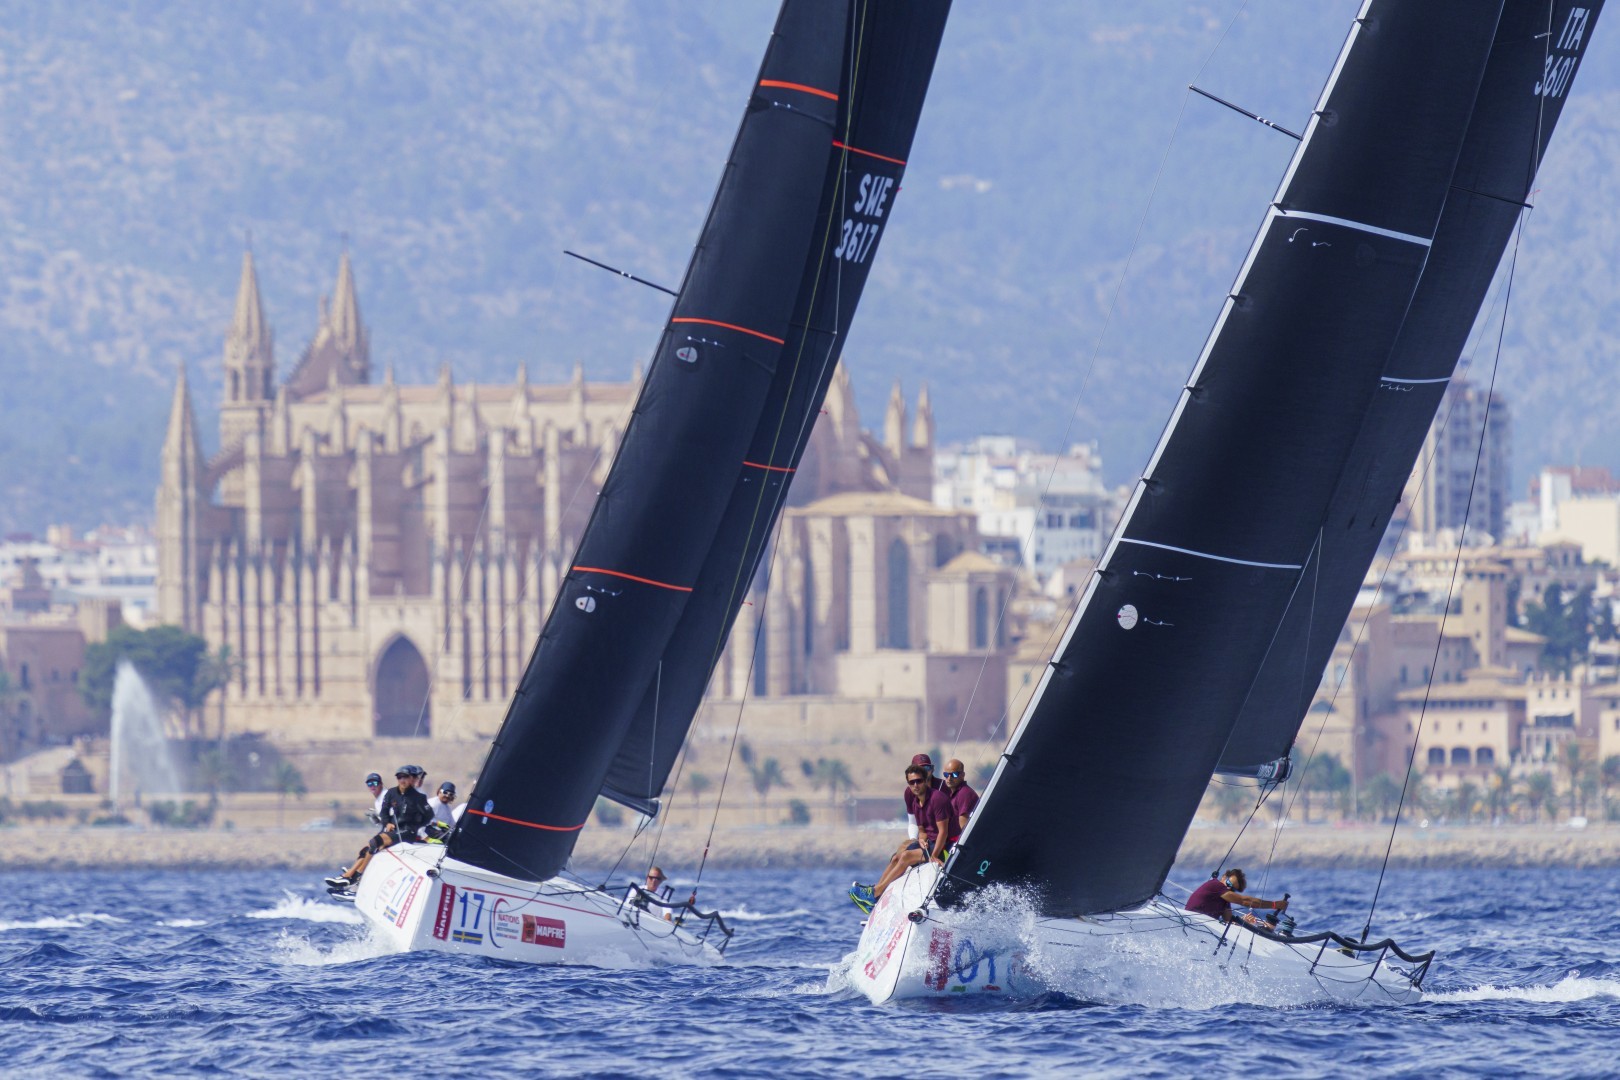 ClubSwan Racing will play a central role at Spain's royal sailing regatta